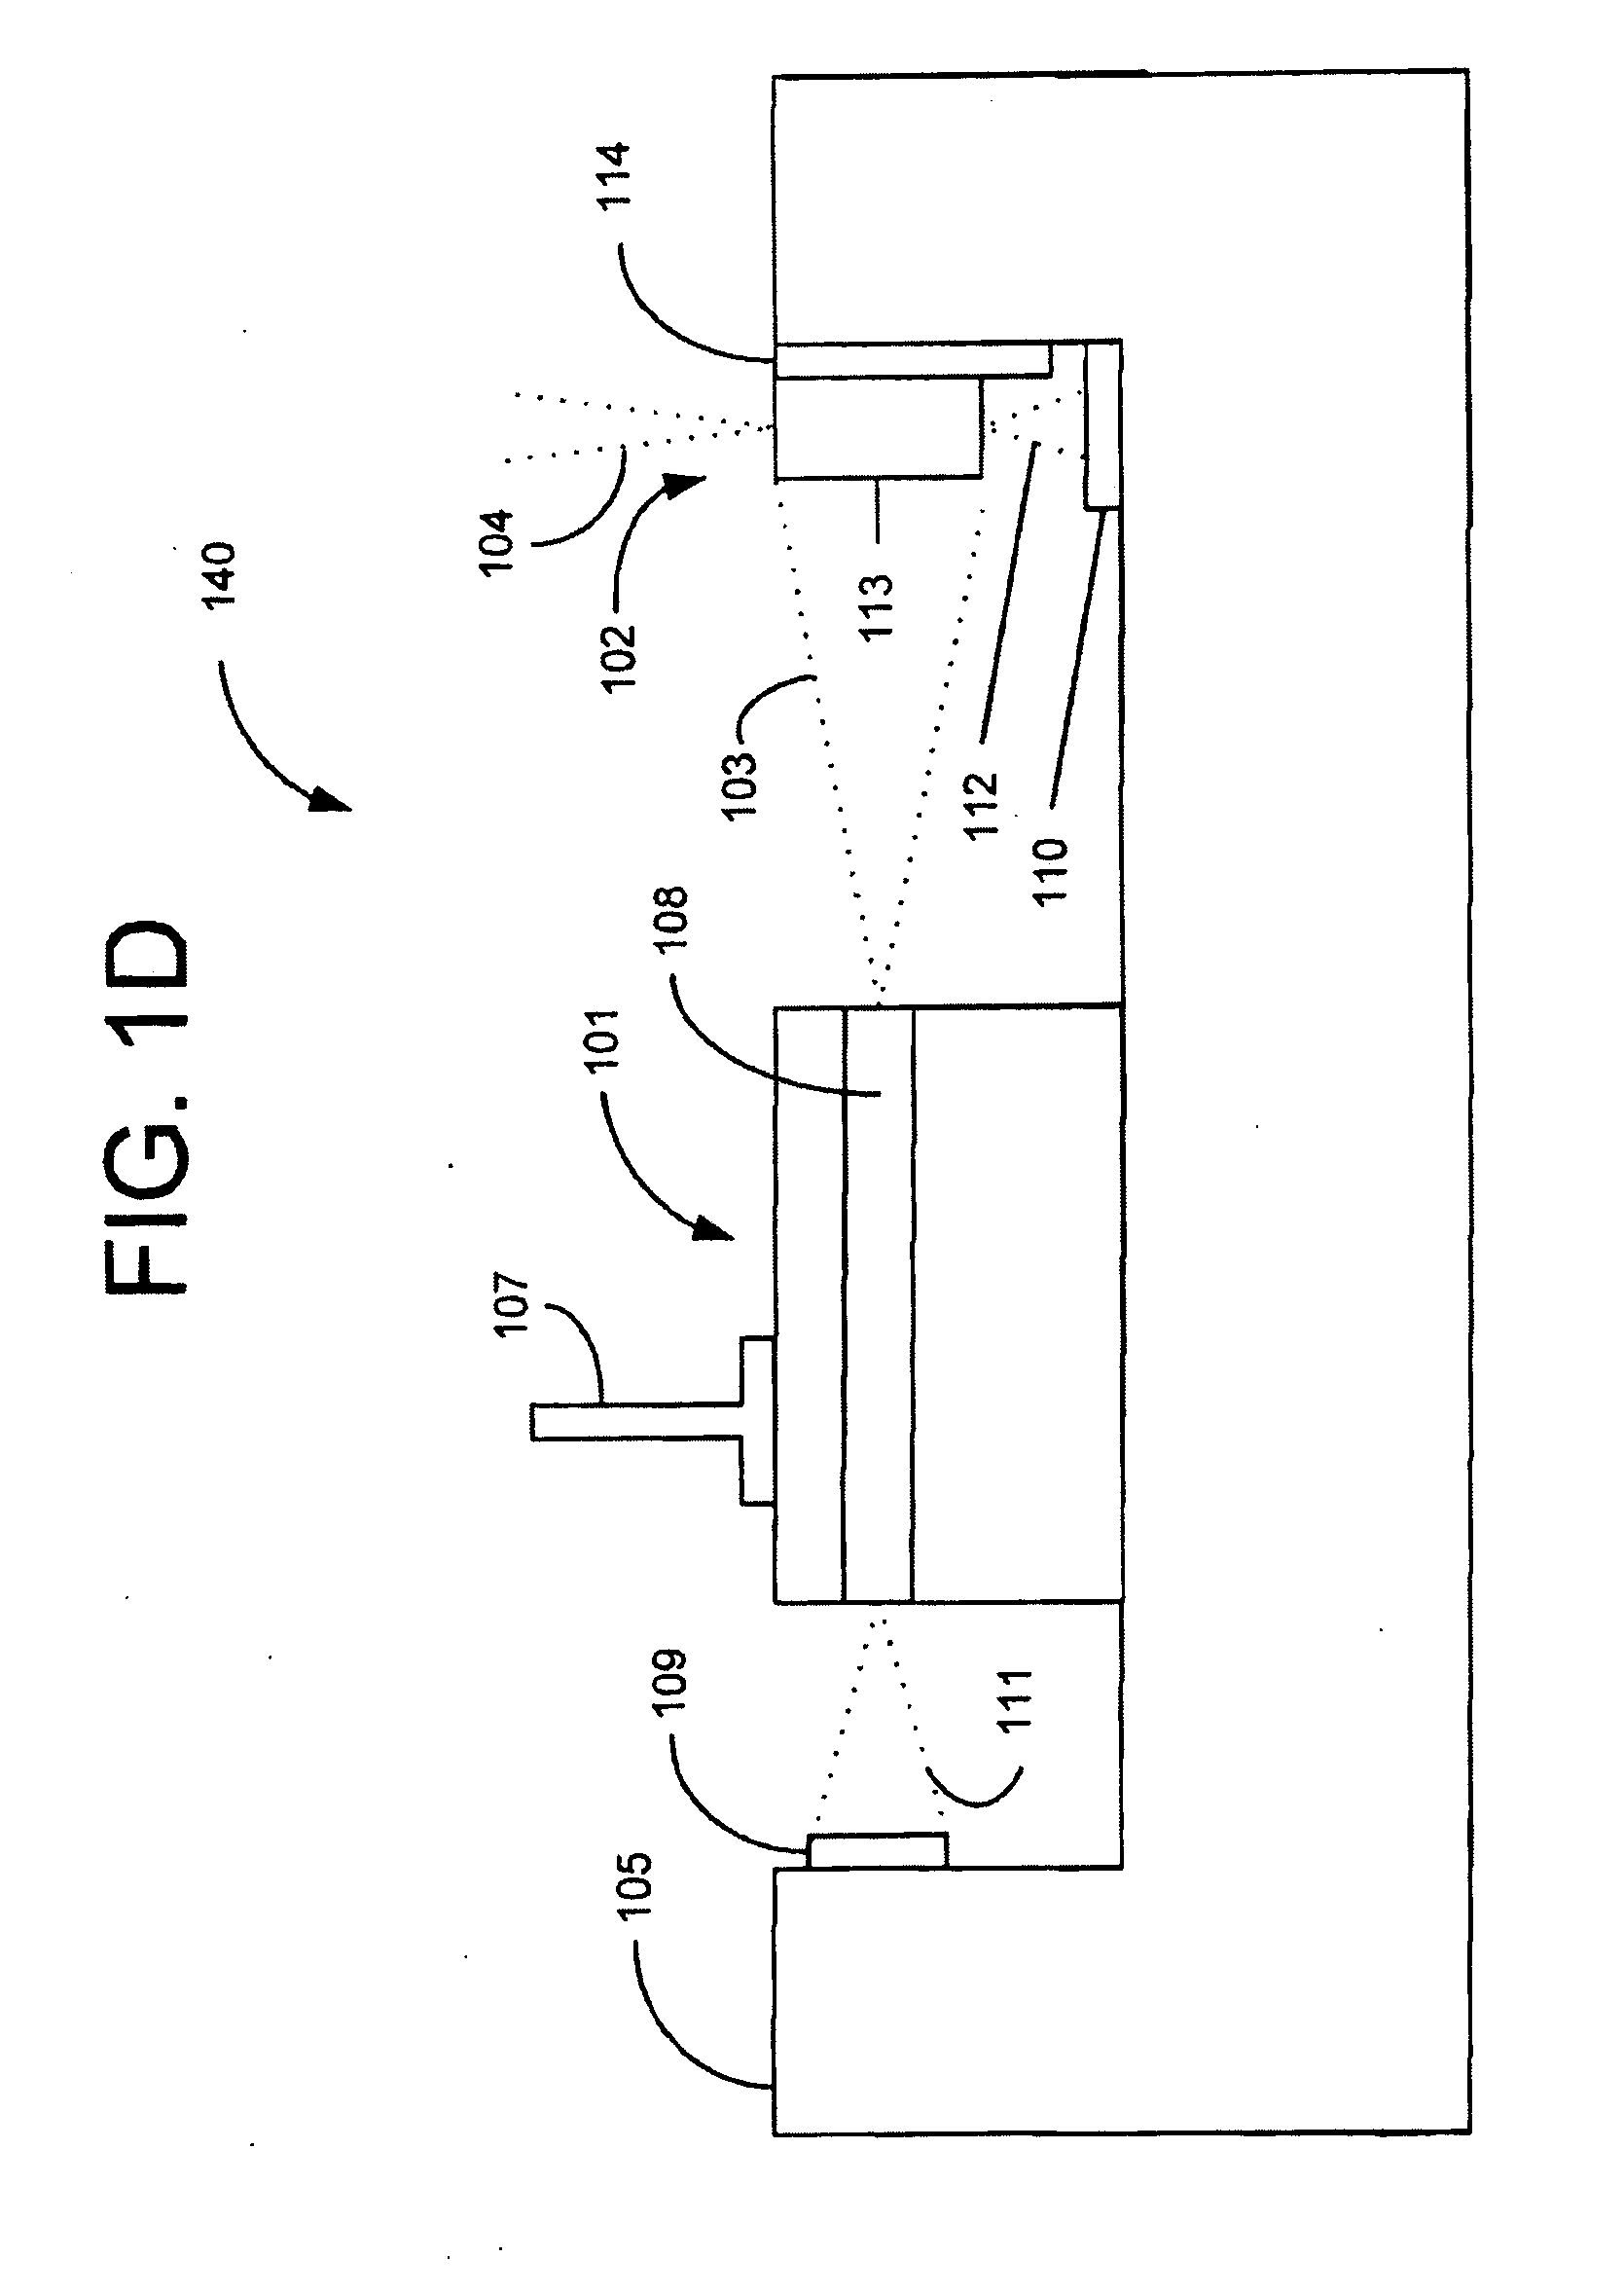 Pumped semiconductor laser systems and methods